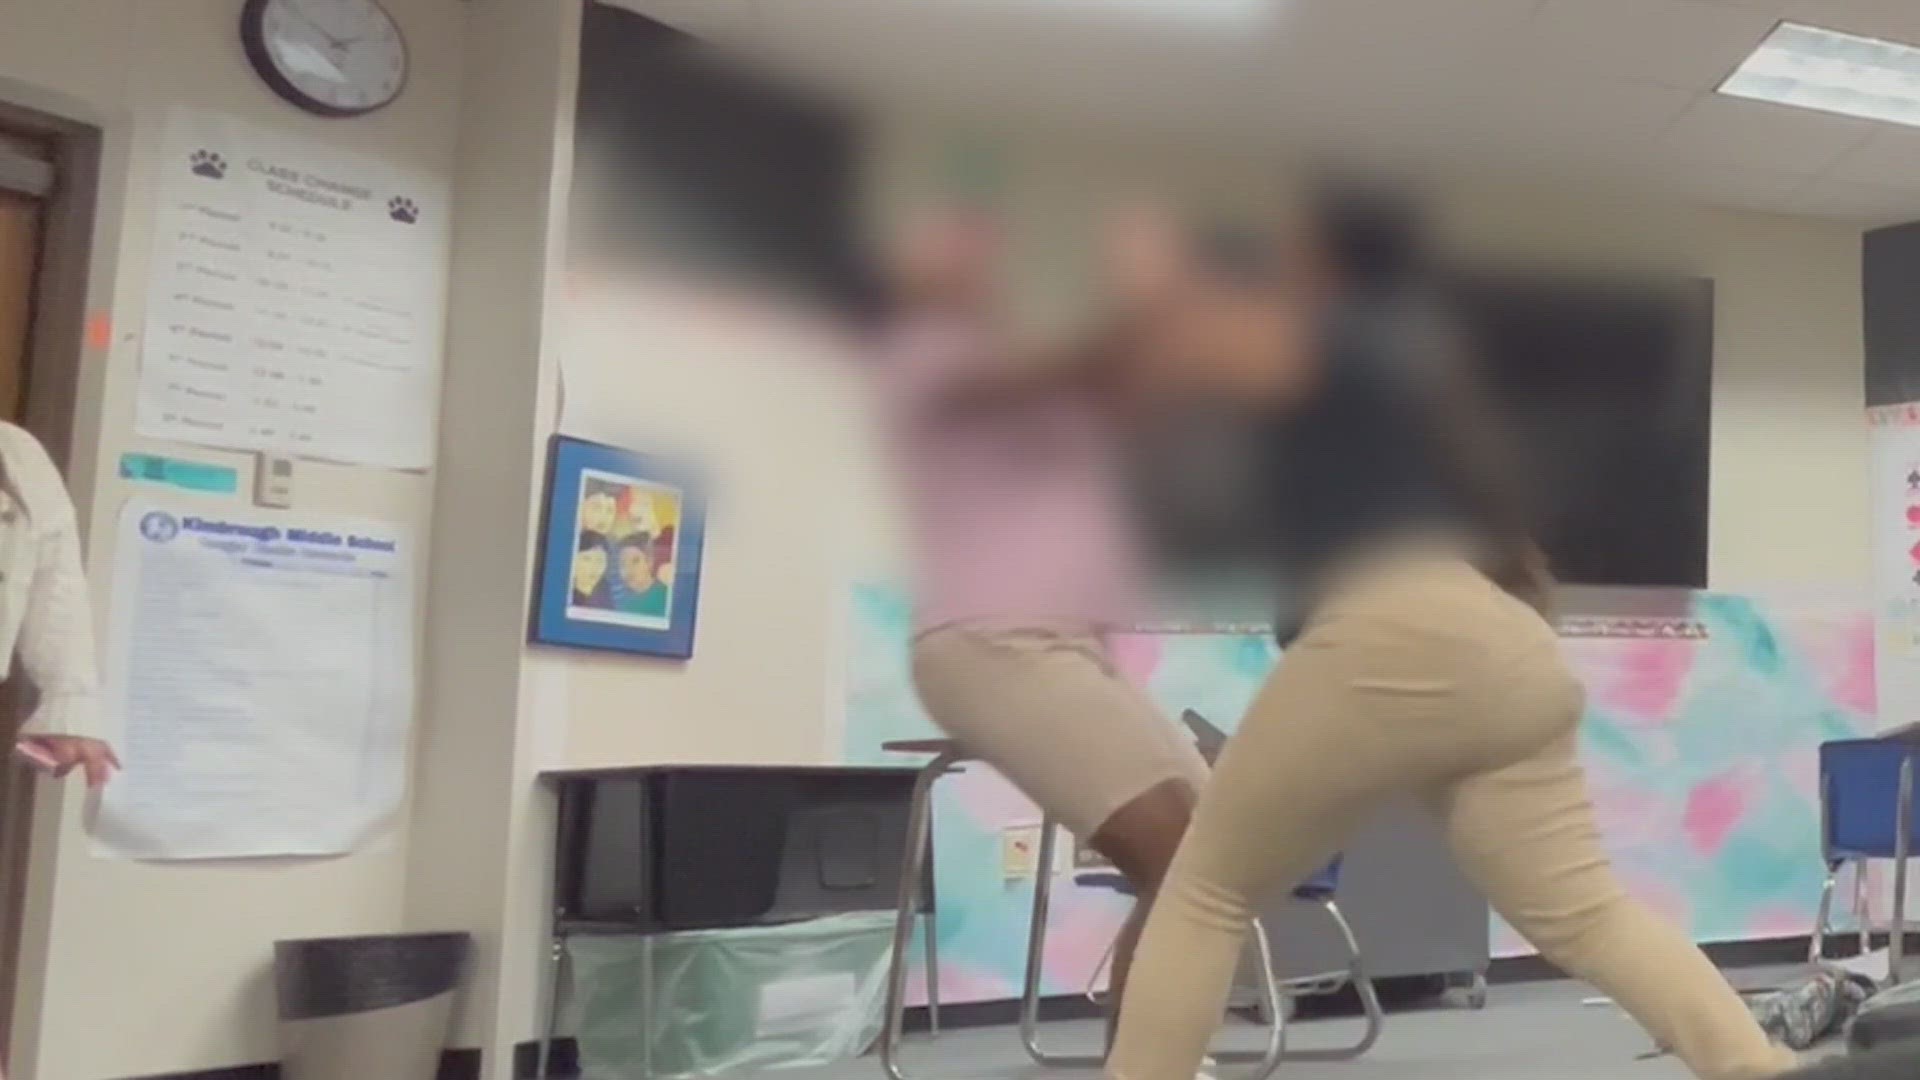 Substitute Teacher Porn Captions - Texas teacher who allegedly allowed fights in class arrested | wfaa.com